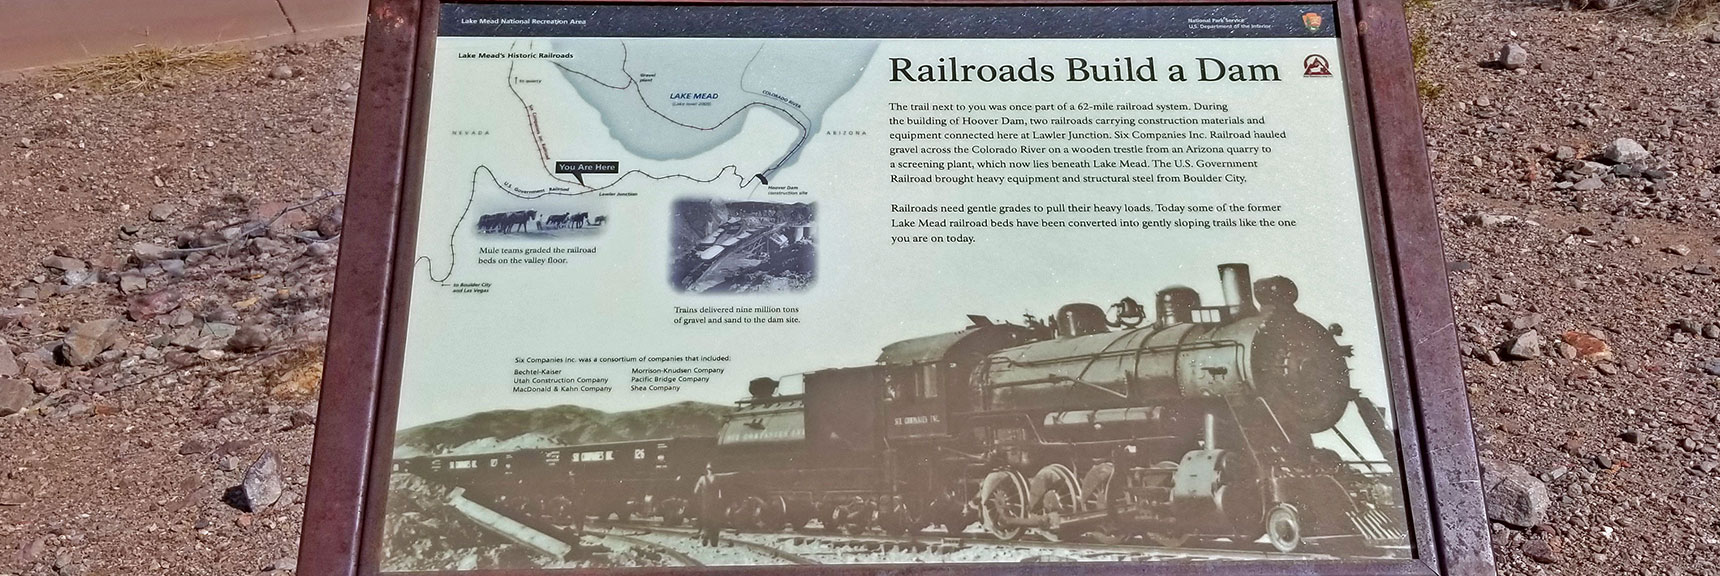 Trains Carried the Construction Materials Needed to Build Hoover Dam | Historic Railroad Trail | Lake Mead National Recreation Area, Nevada